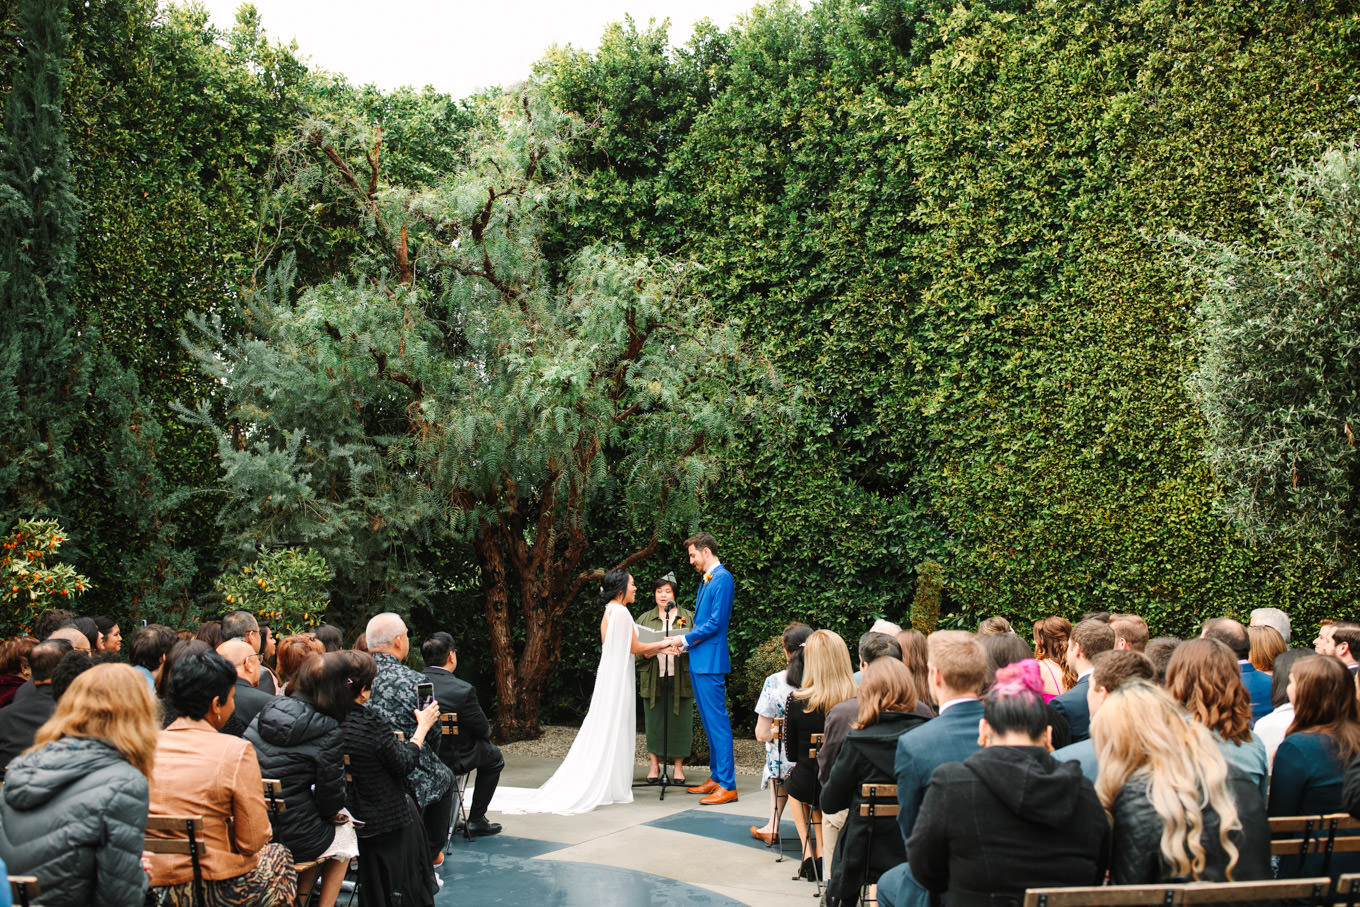 Wedding ceremony with officiant dressed as Joey from Friends | TV inspired wedding at The Fig House Los Angeles | Published on The Knot | Fresh and colorful photography for fun-loving couples in Southern California | #losangeleswedding #TVwedding #colorfulwedding #theknot   Source: Mary Costa Photography | Los Angeles wedding photographer